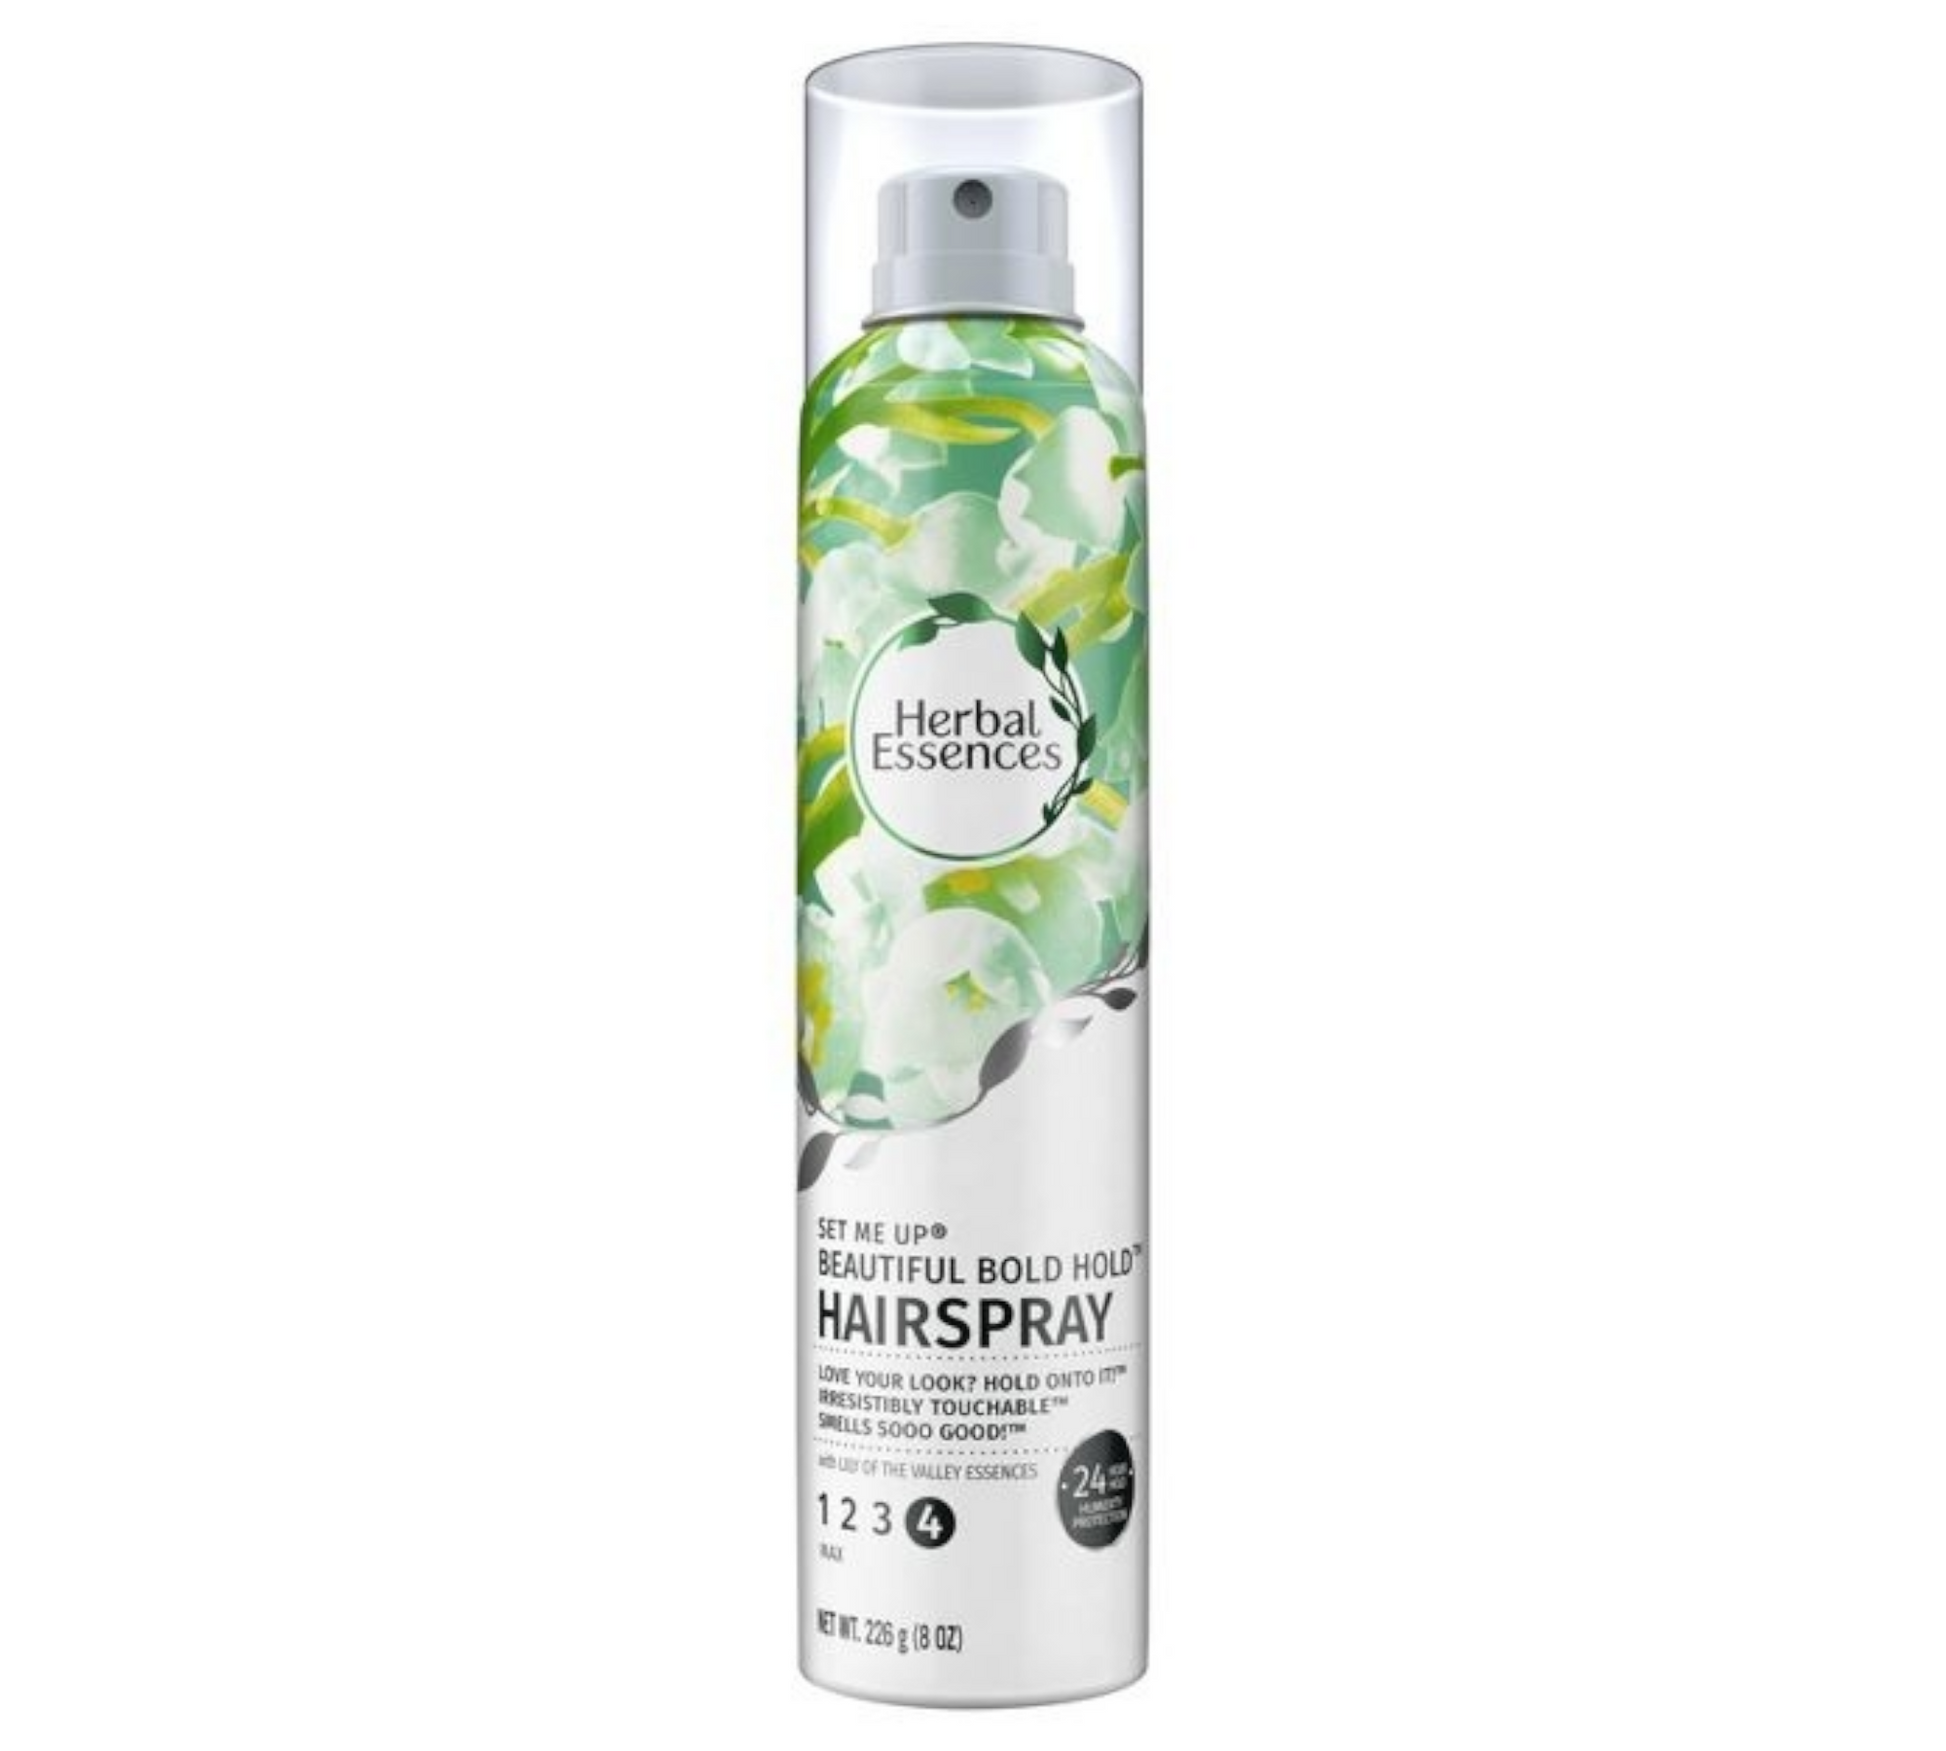 Herbal Essence Cupid Beauty Supplies Hair Spray Herbal Essences Set Me Up Beautiful Bold Hairspray with Lily of the Valley Essences - 8oz